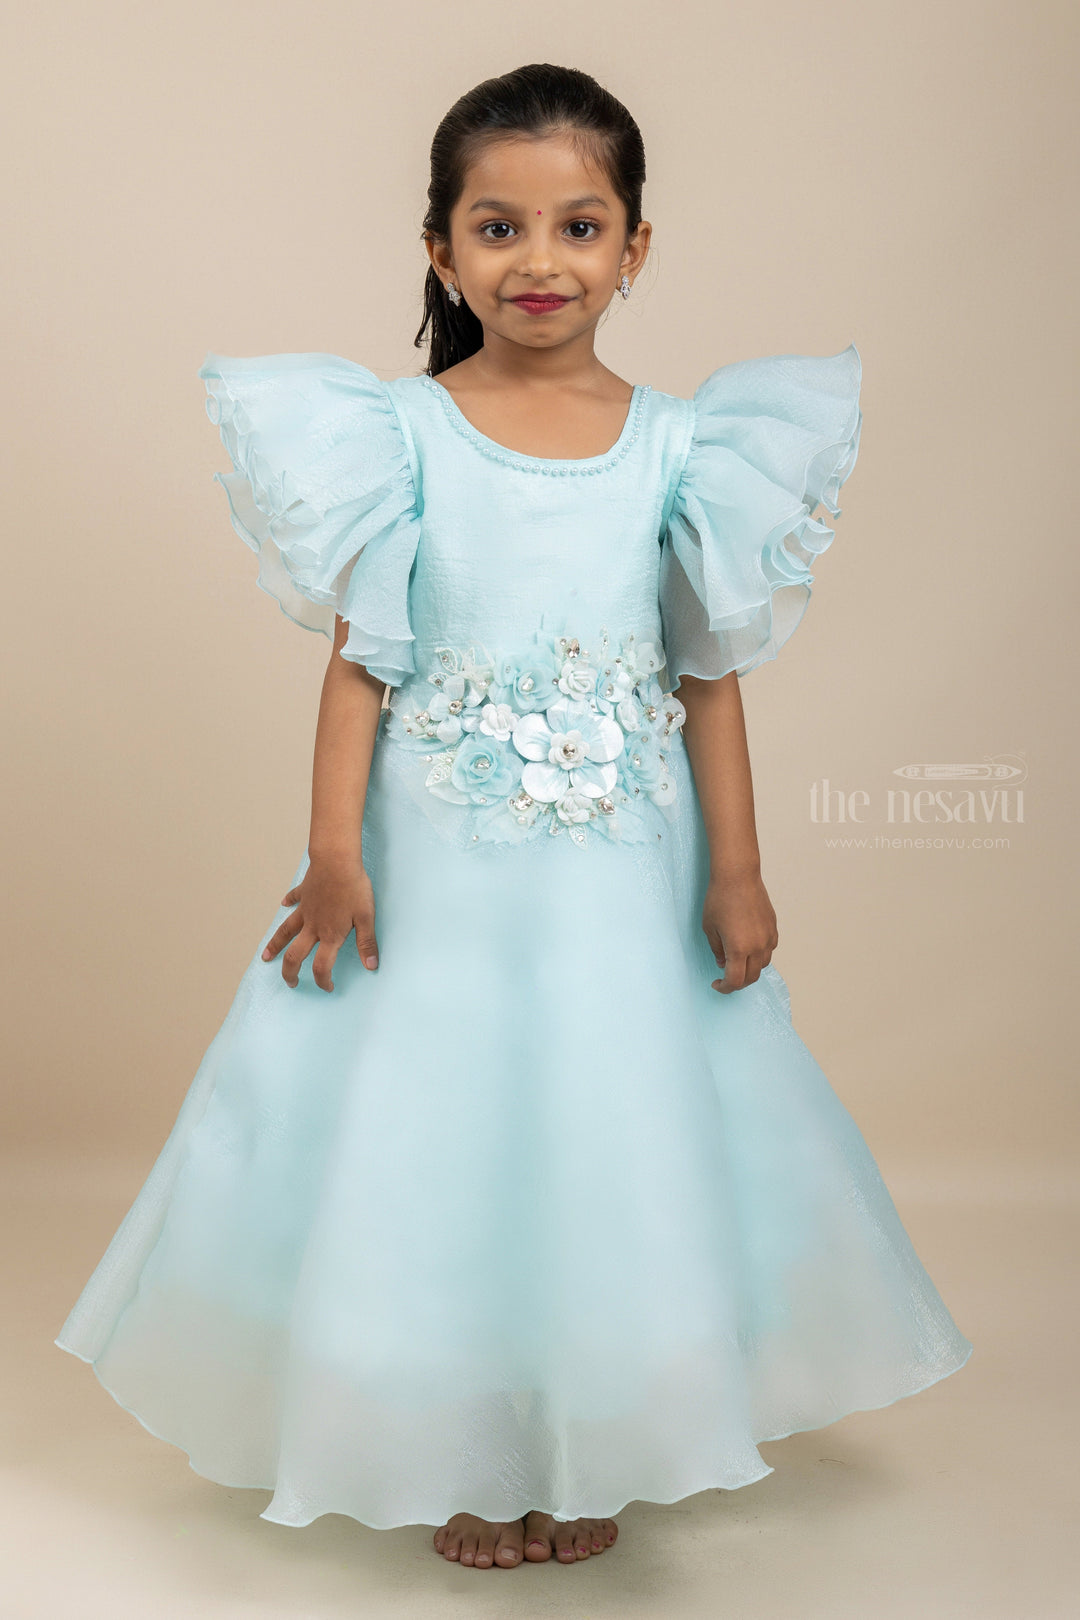 The Nesavu Girls Fancy Party Frock Posh Powder Blue - Floral Embellished Party Wear Gowns For Little Girls Nesavu 22 (4Y) / Turquoise PF93A-22 Blue Party Wear Frocks For Girls | Stylish Festive Collection| The Nesavu